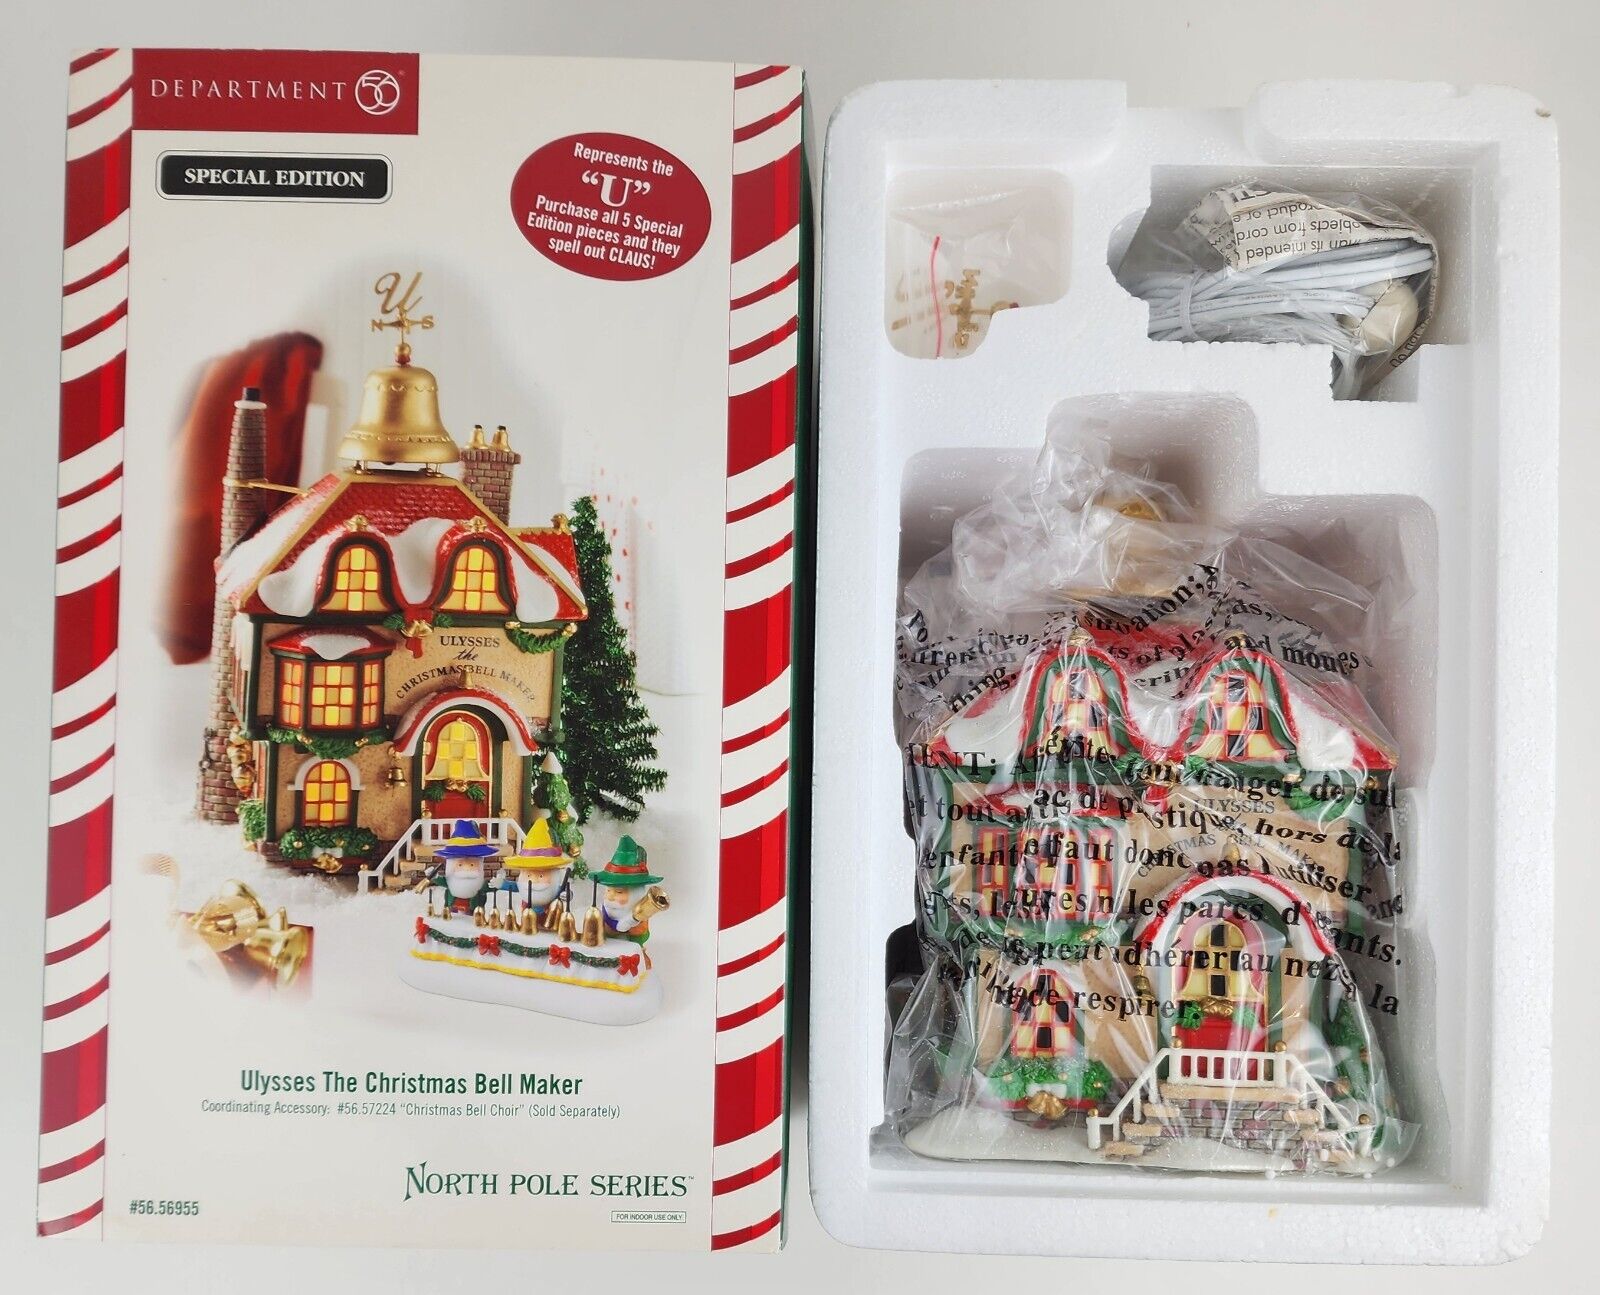 Department 56 North Pole Series ULYSSES THE CHRISTMAS BELL MAKER